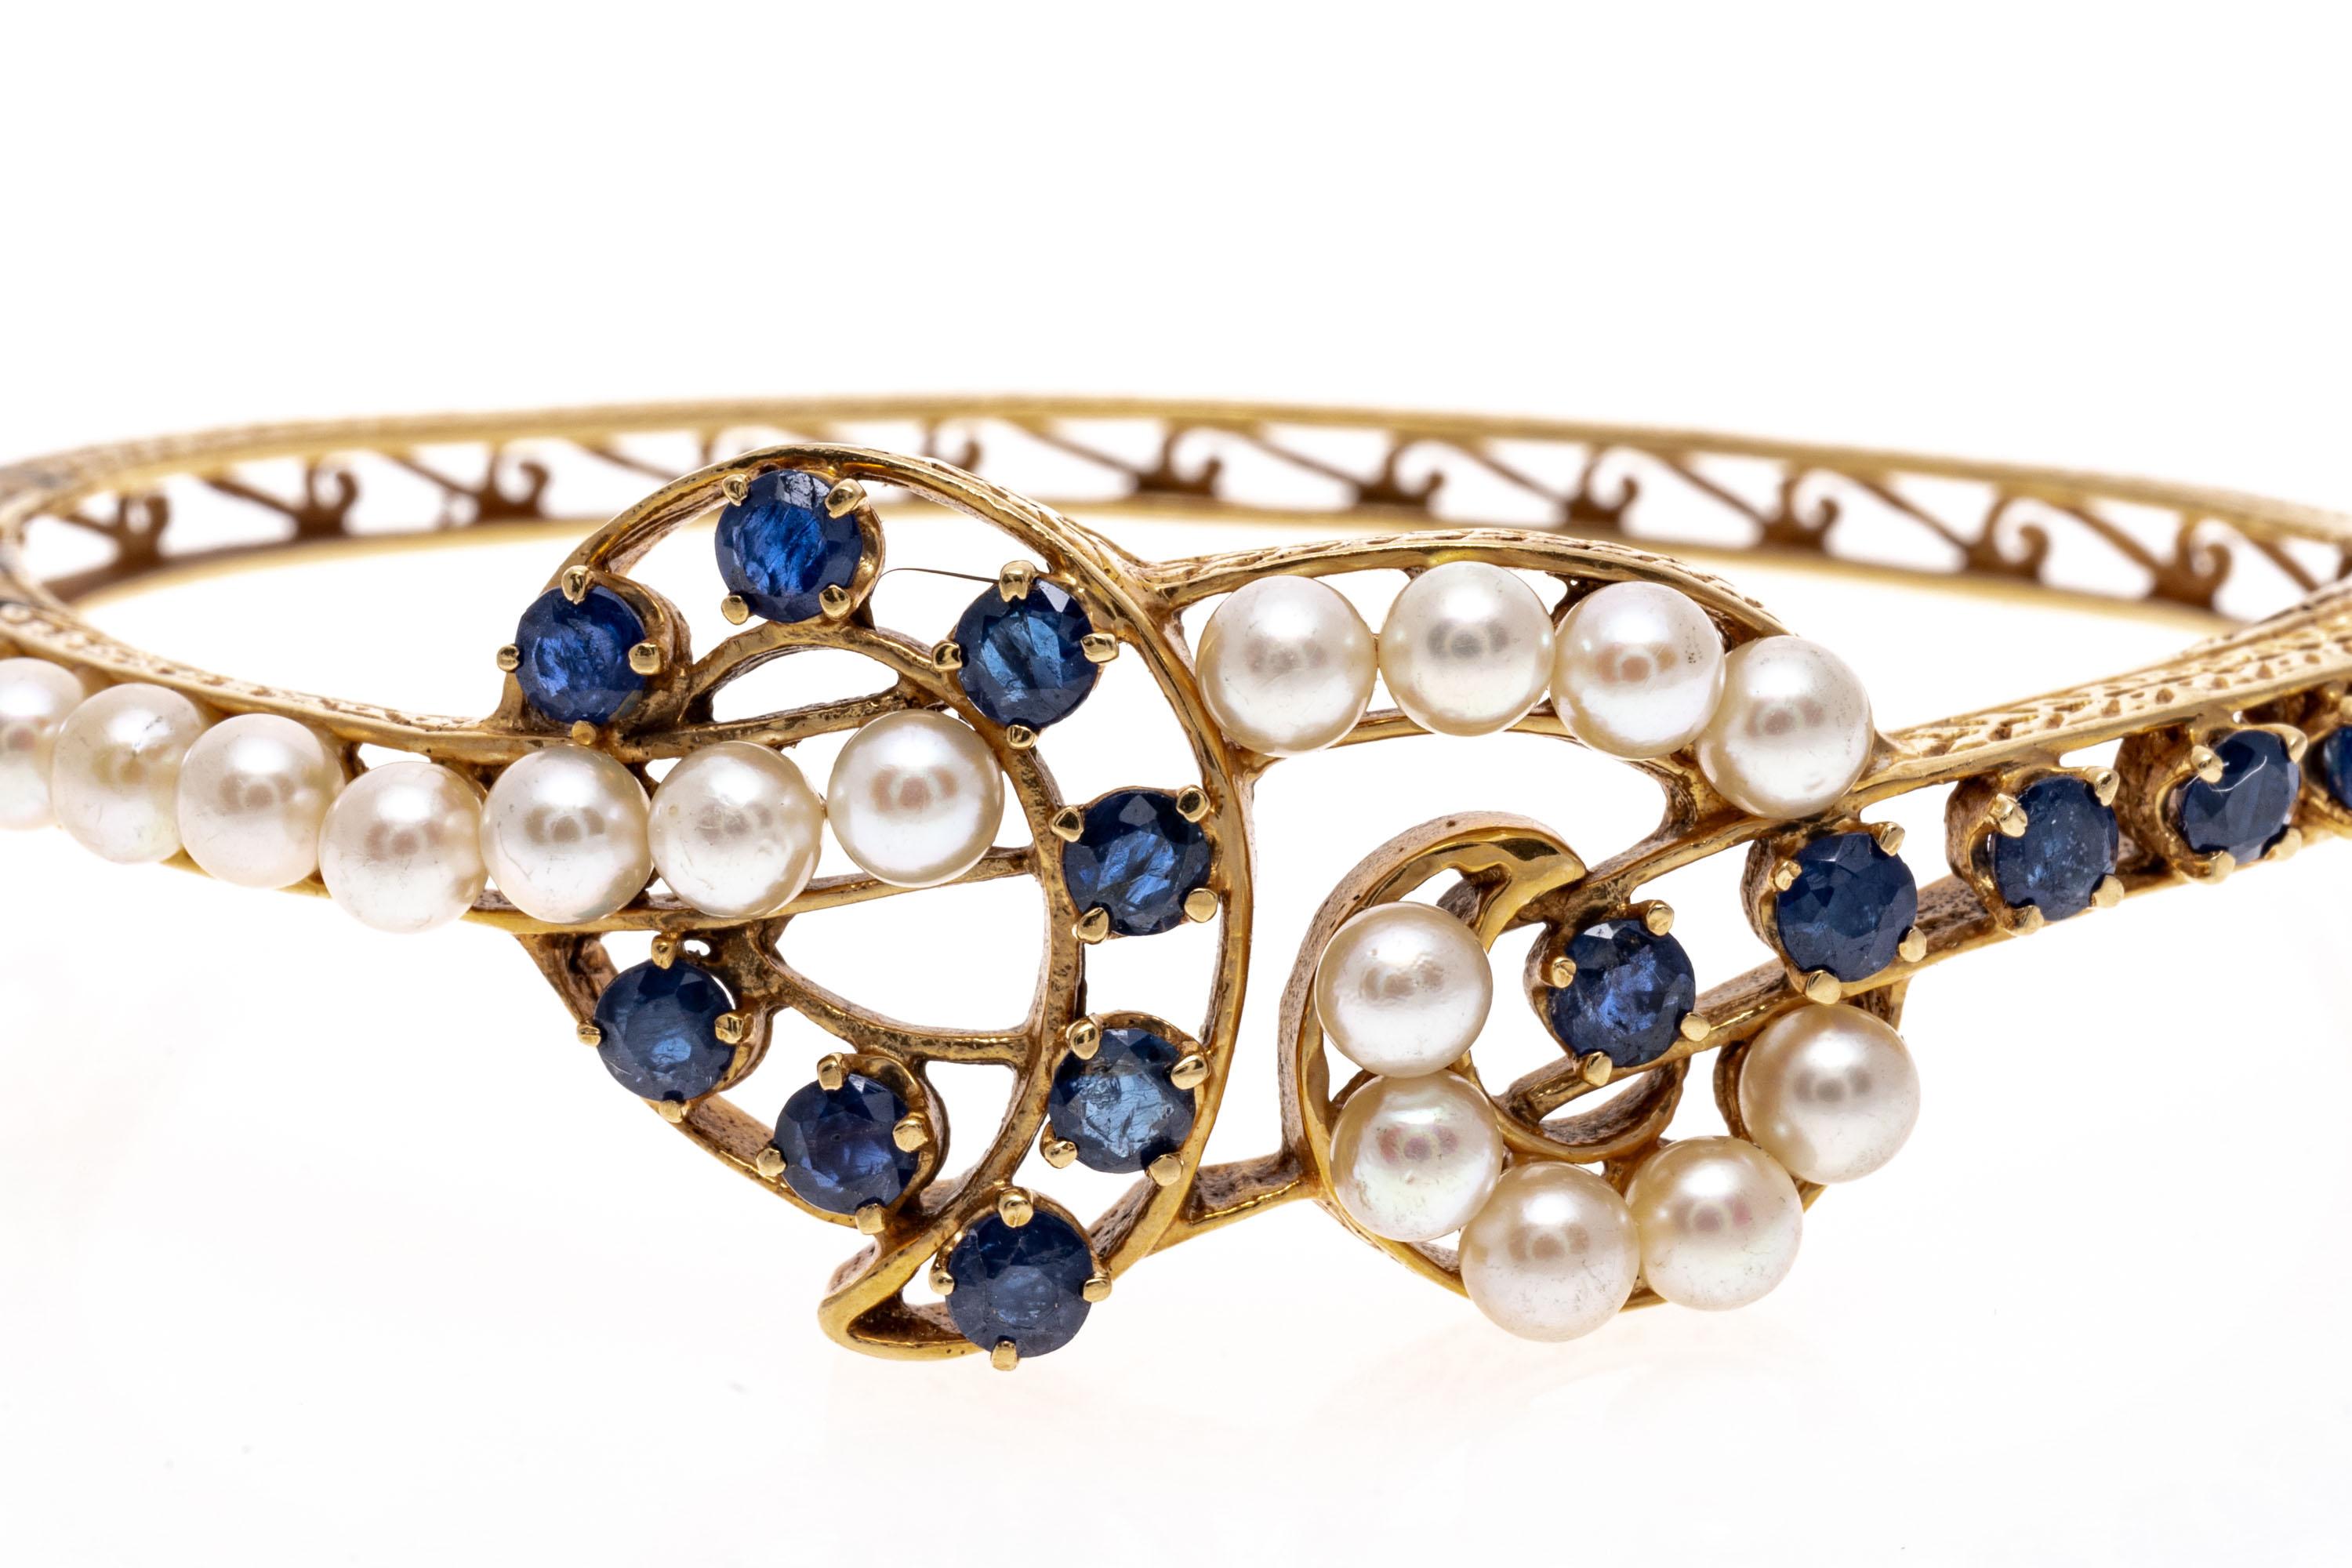 Retro 14K Gold, Sapphire and Cultured Pearl Knot Motif Bangle Bracelet For Sale